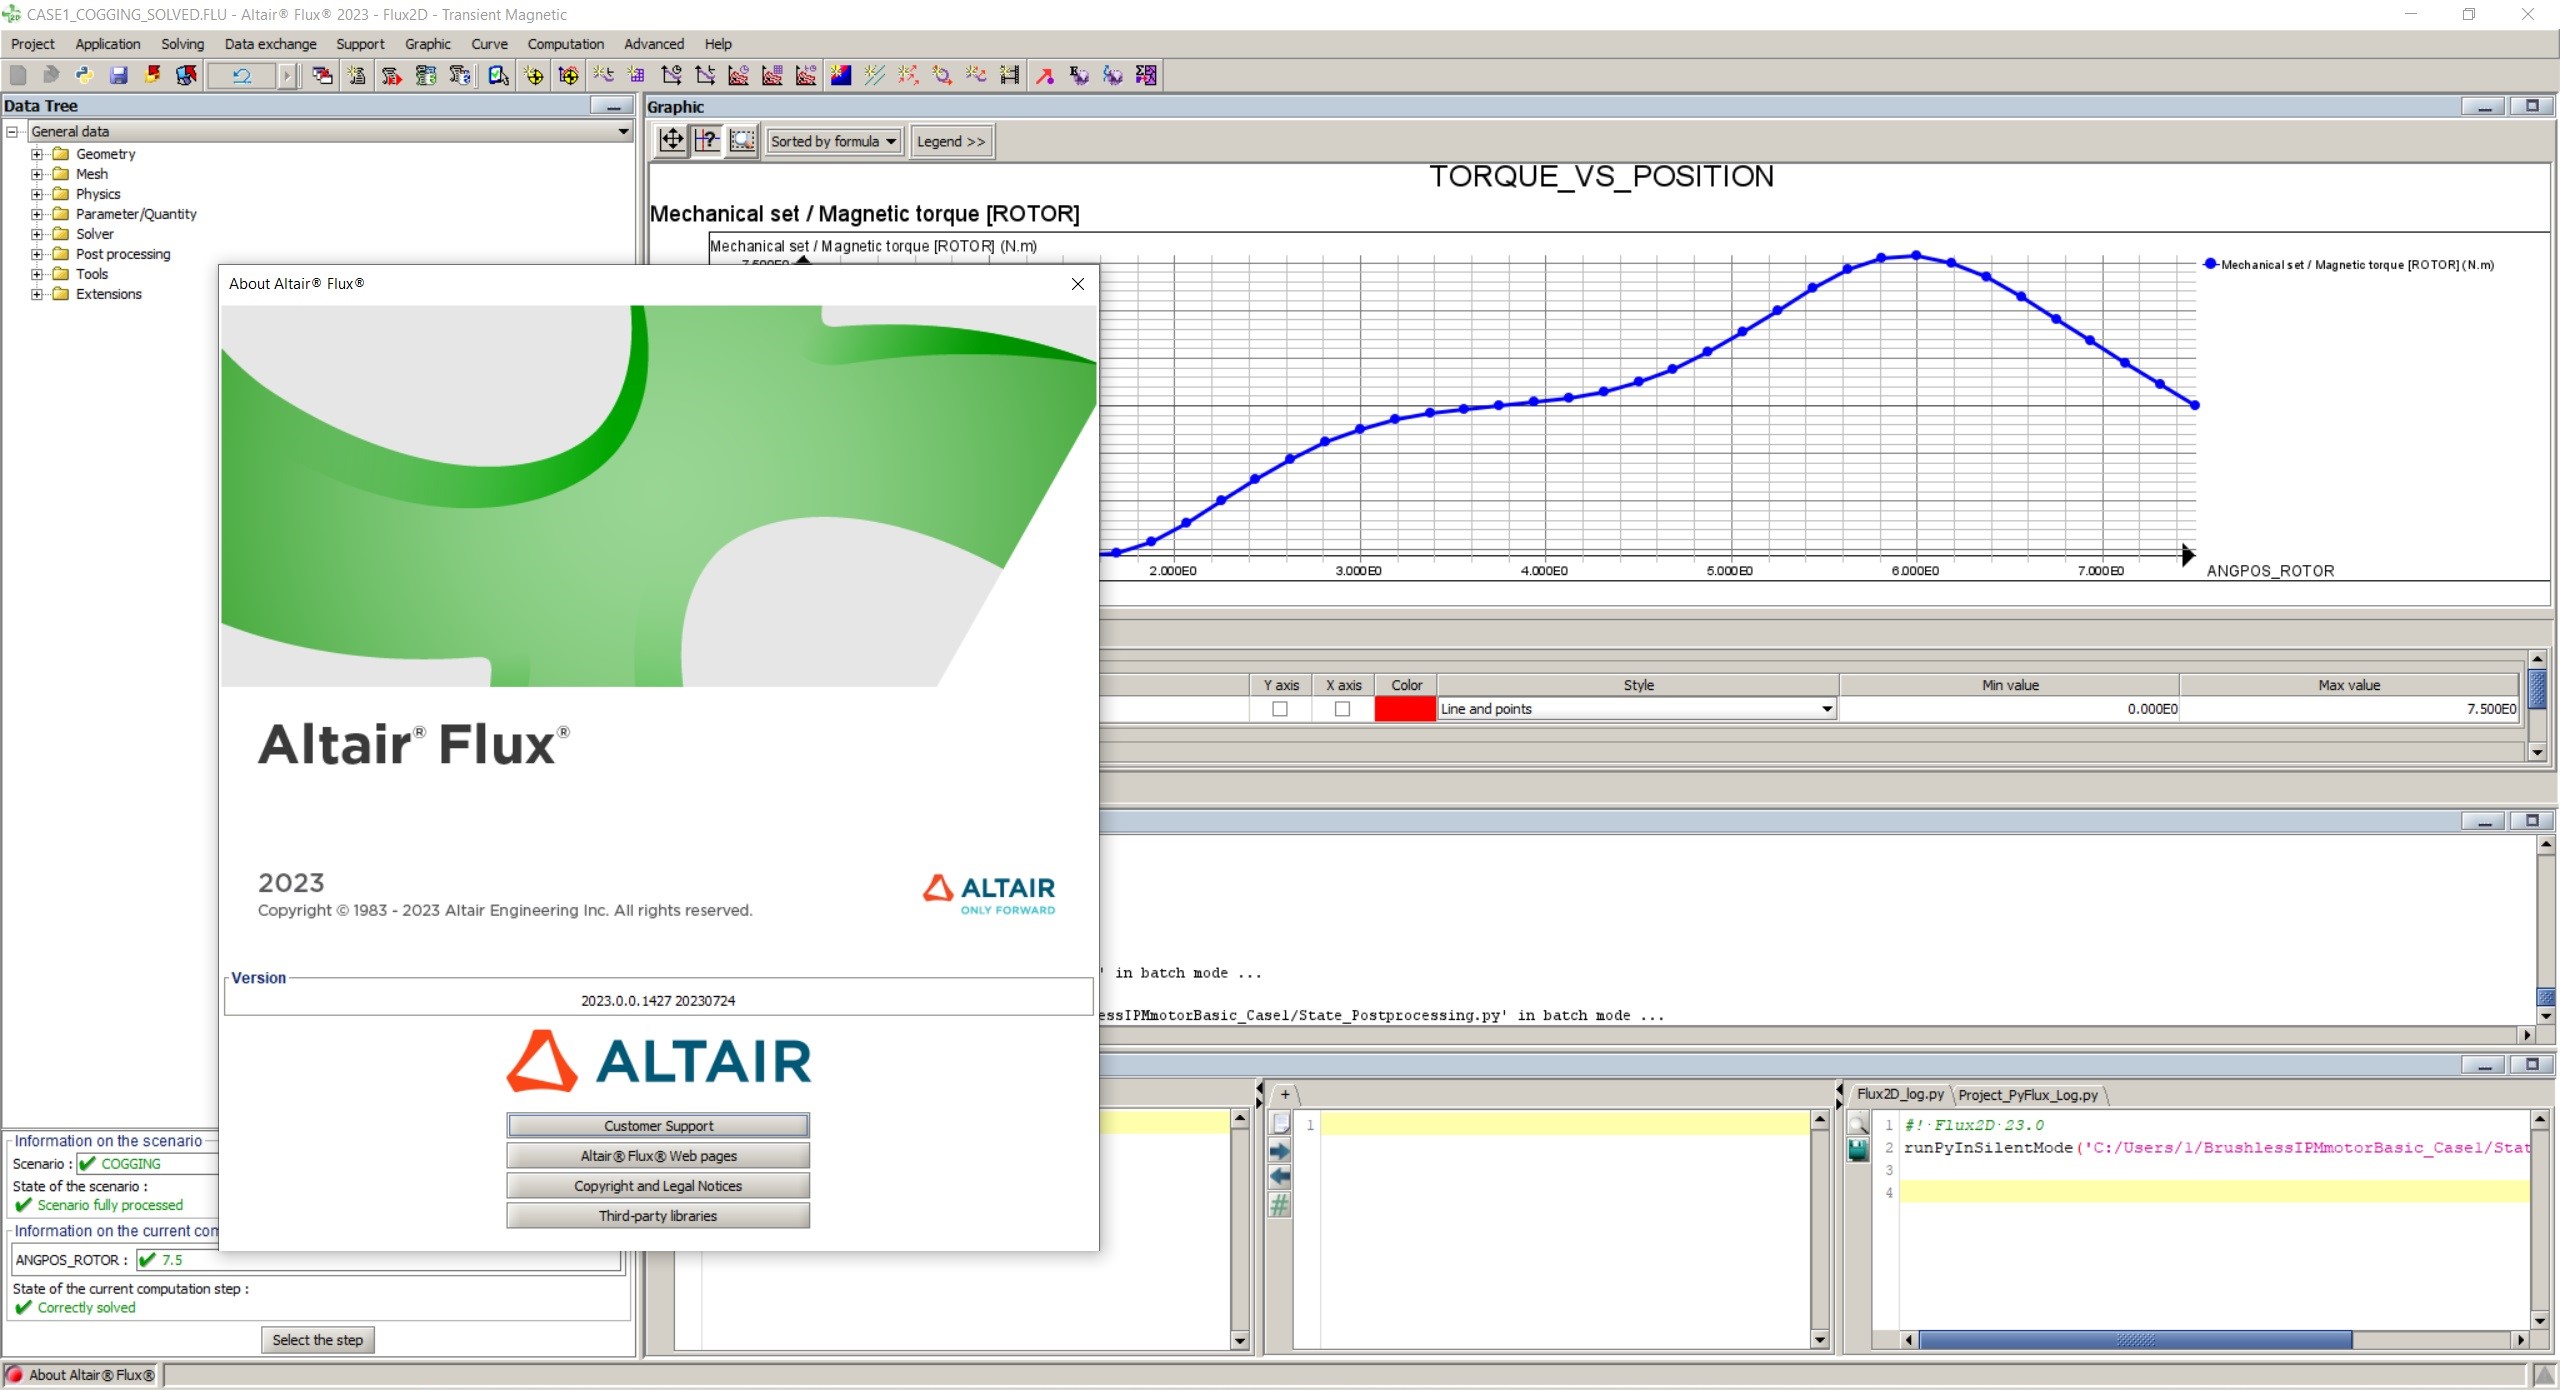 Working with Altair Flux and FluxMotor 2023.0 full license